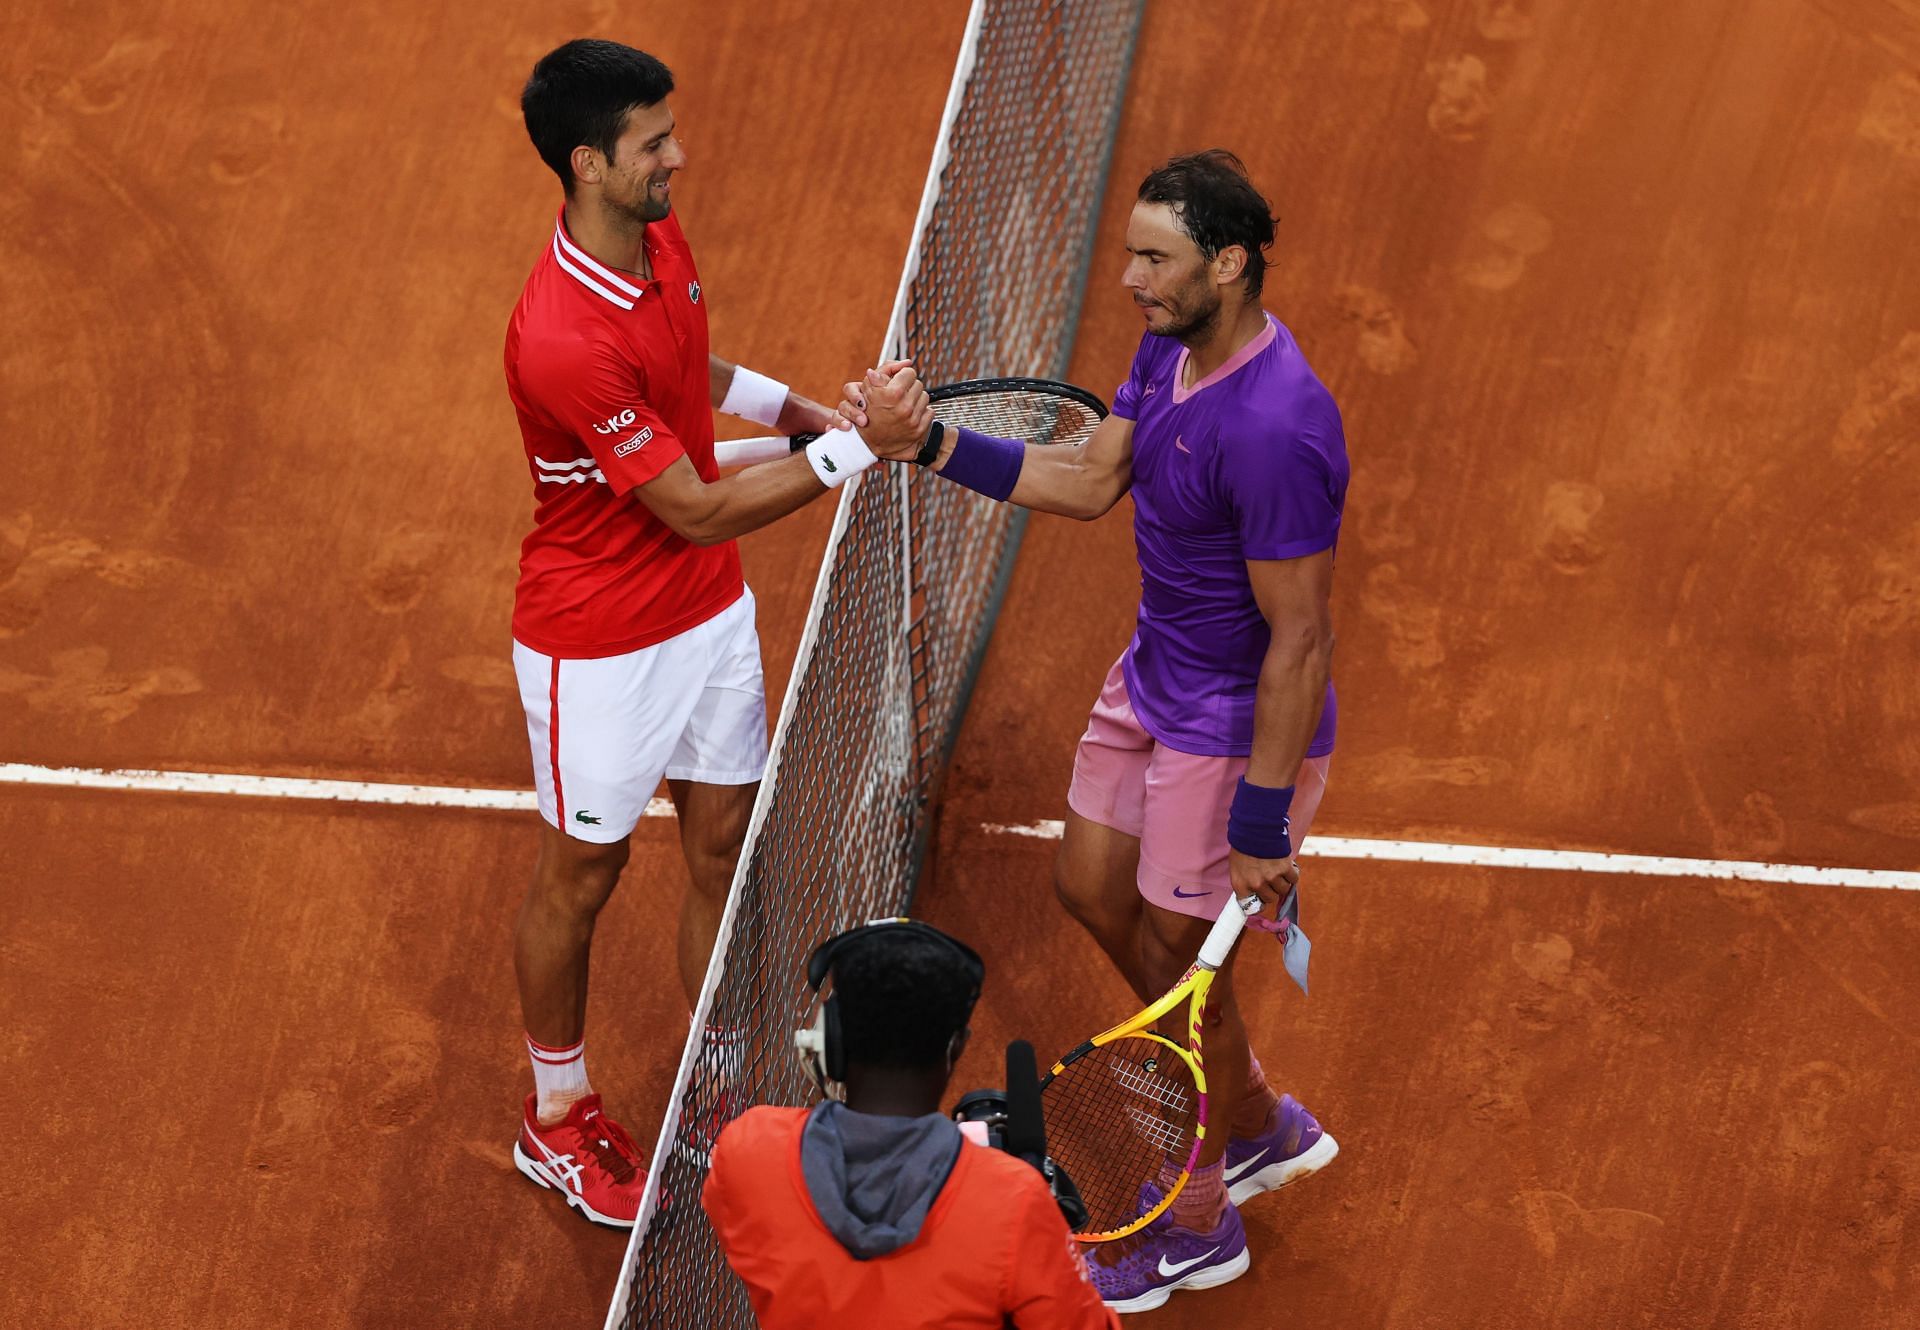 Djokovic lost to Nadal in the final of the 2021 Italian Open